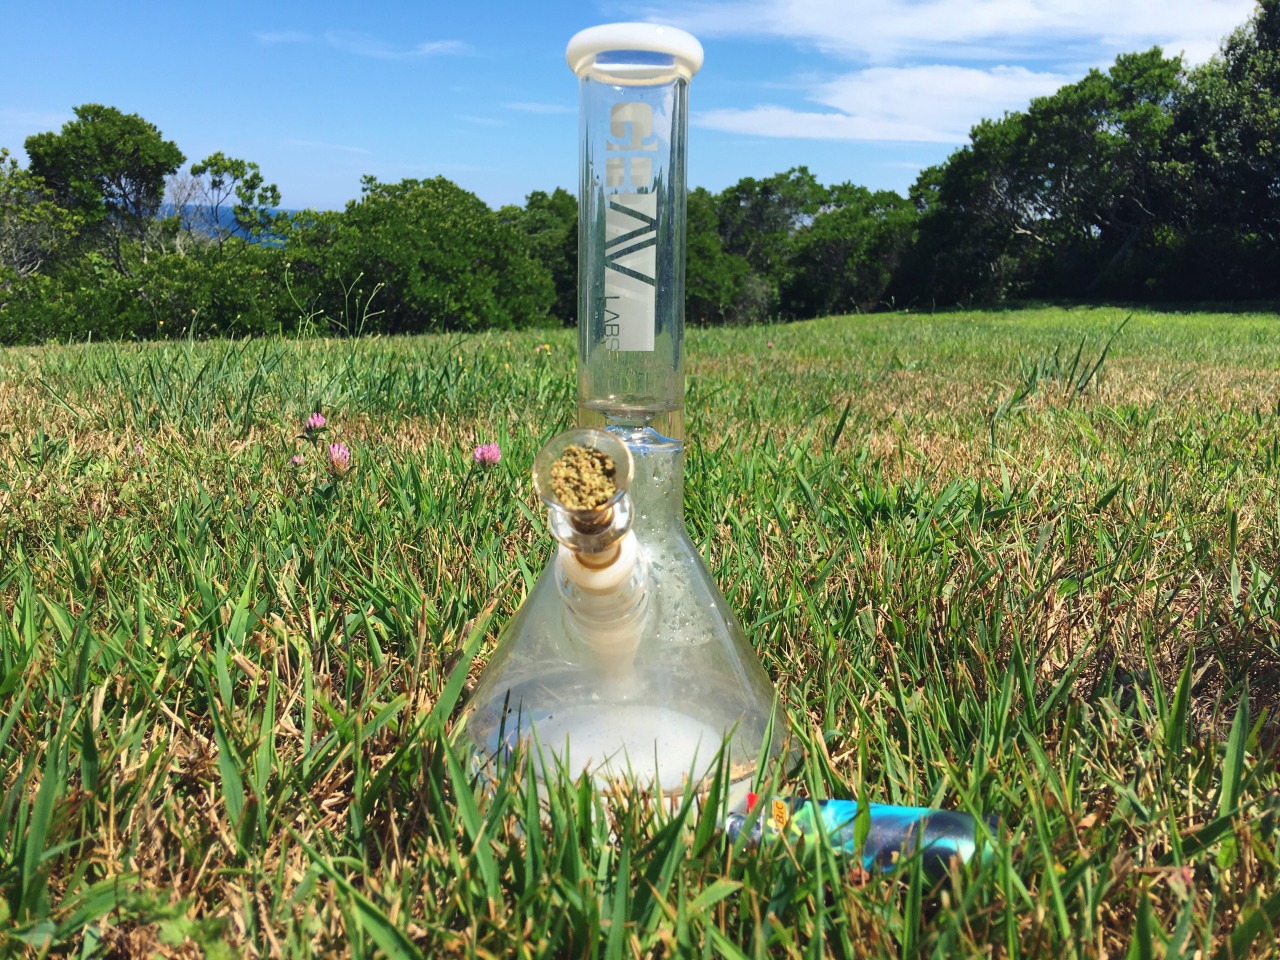 andthesorcerersstoned:Had to bring the Grav along on our trip!